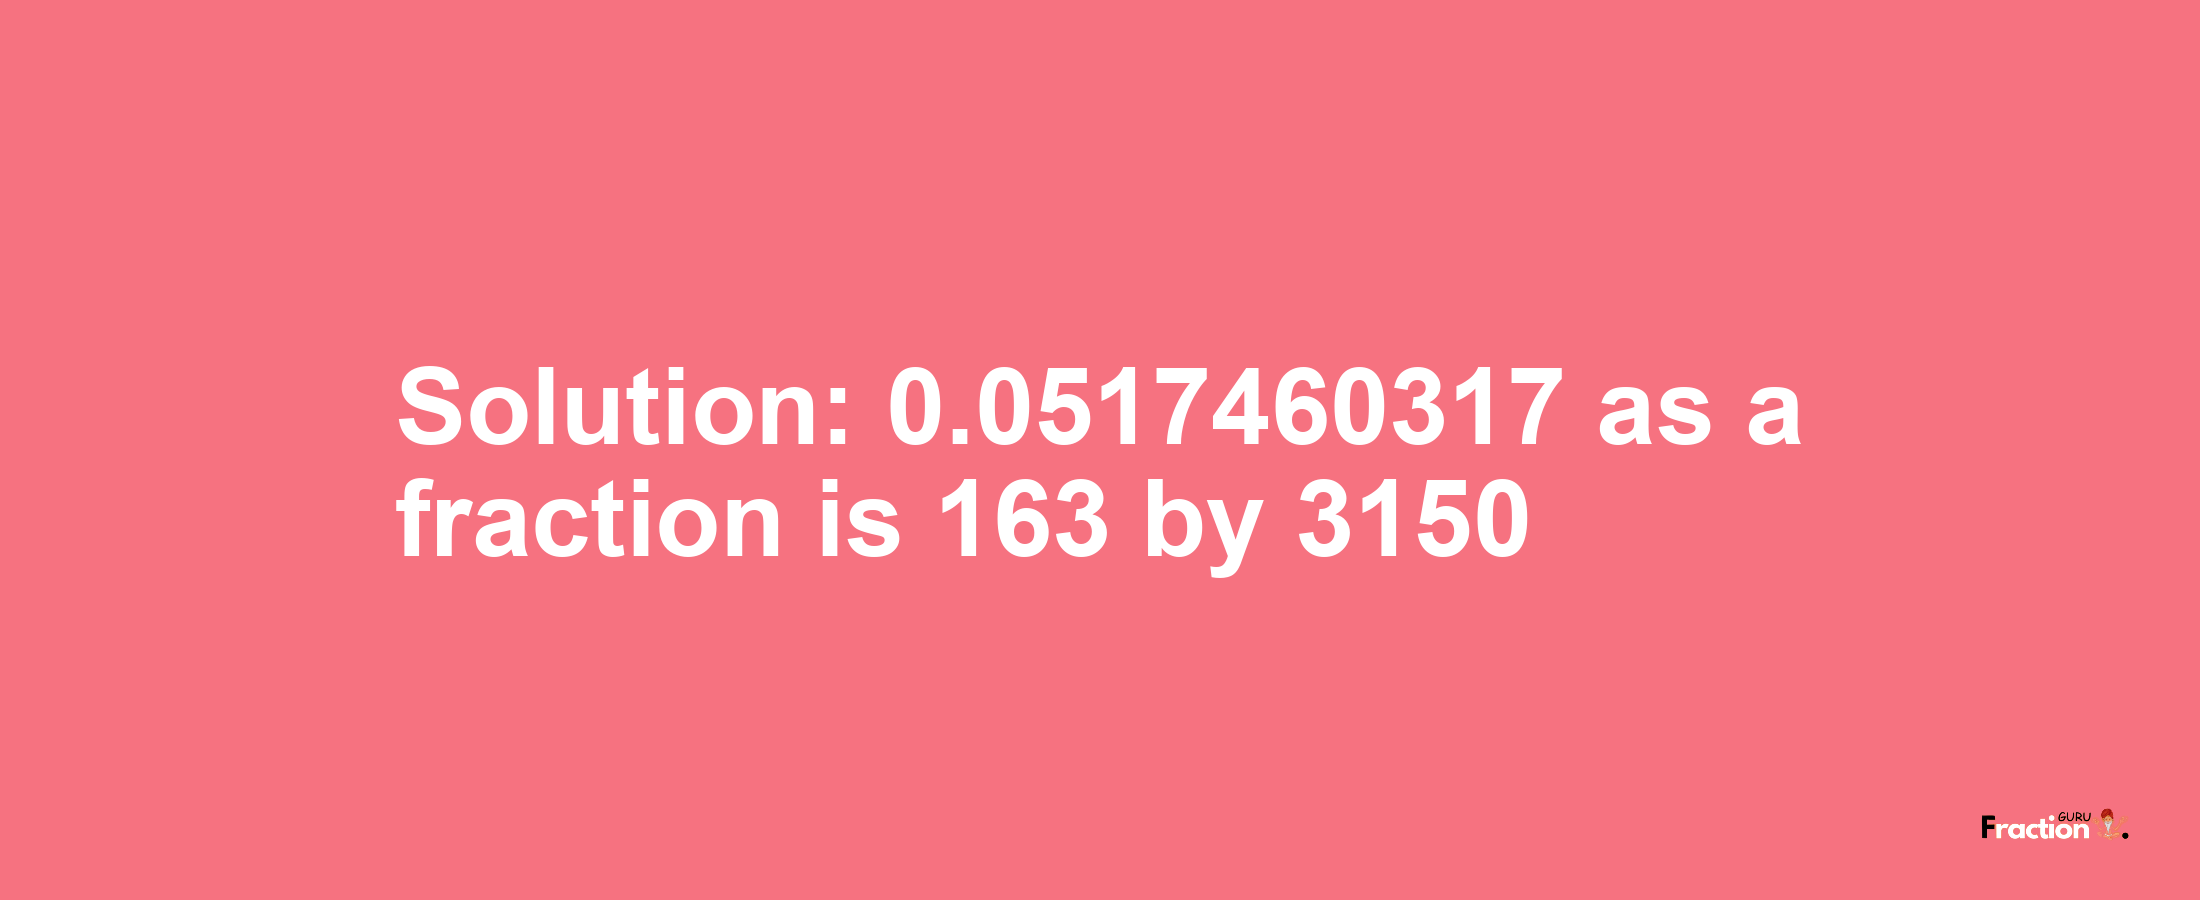 Solution:0.0517460317 as a fraction is 163/3150